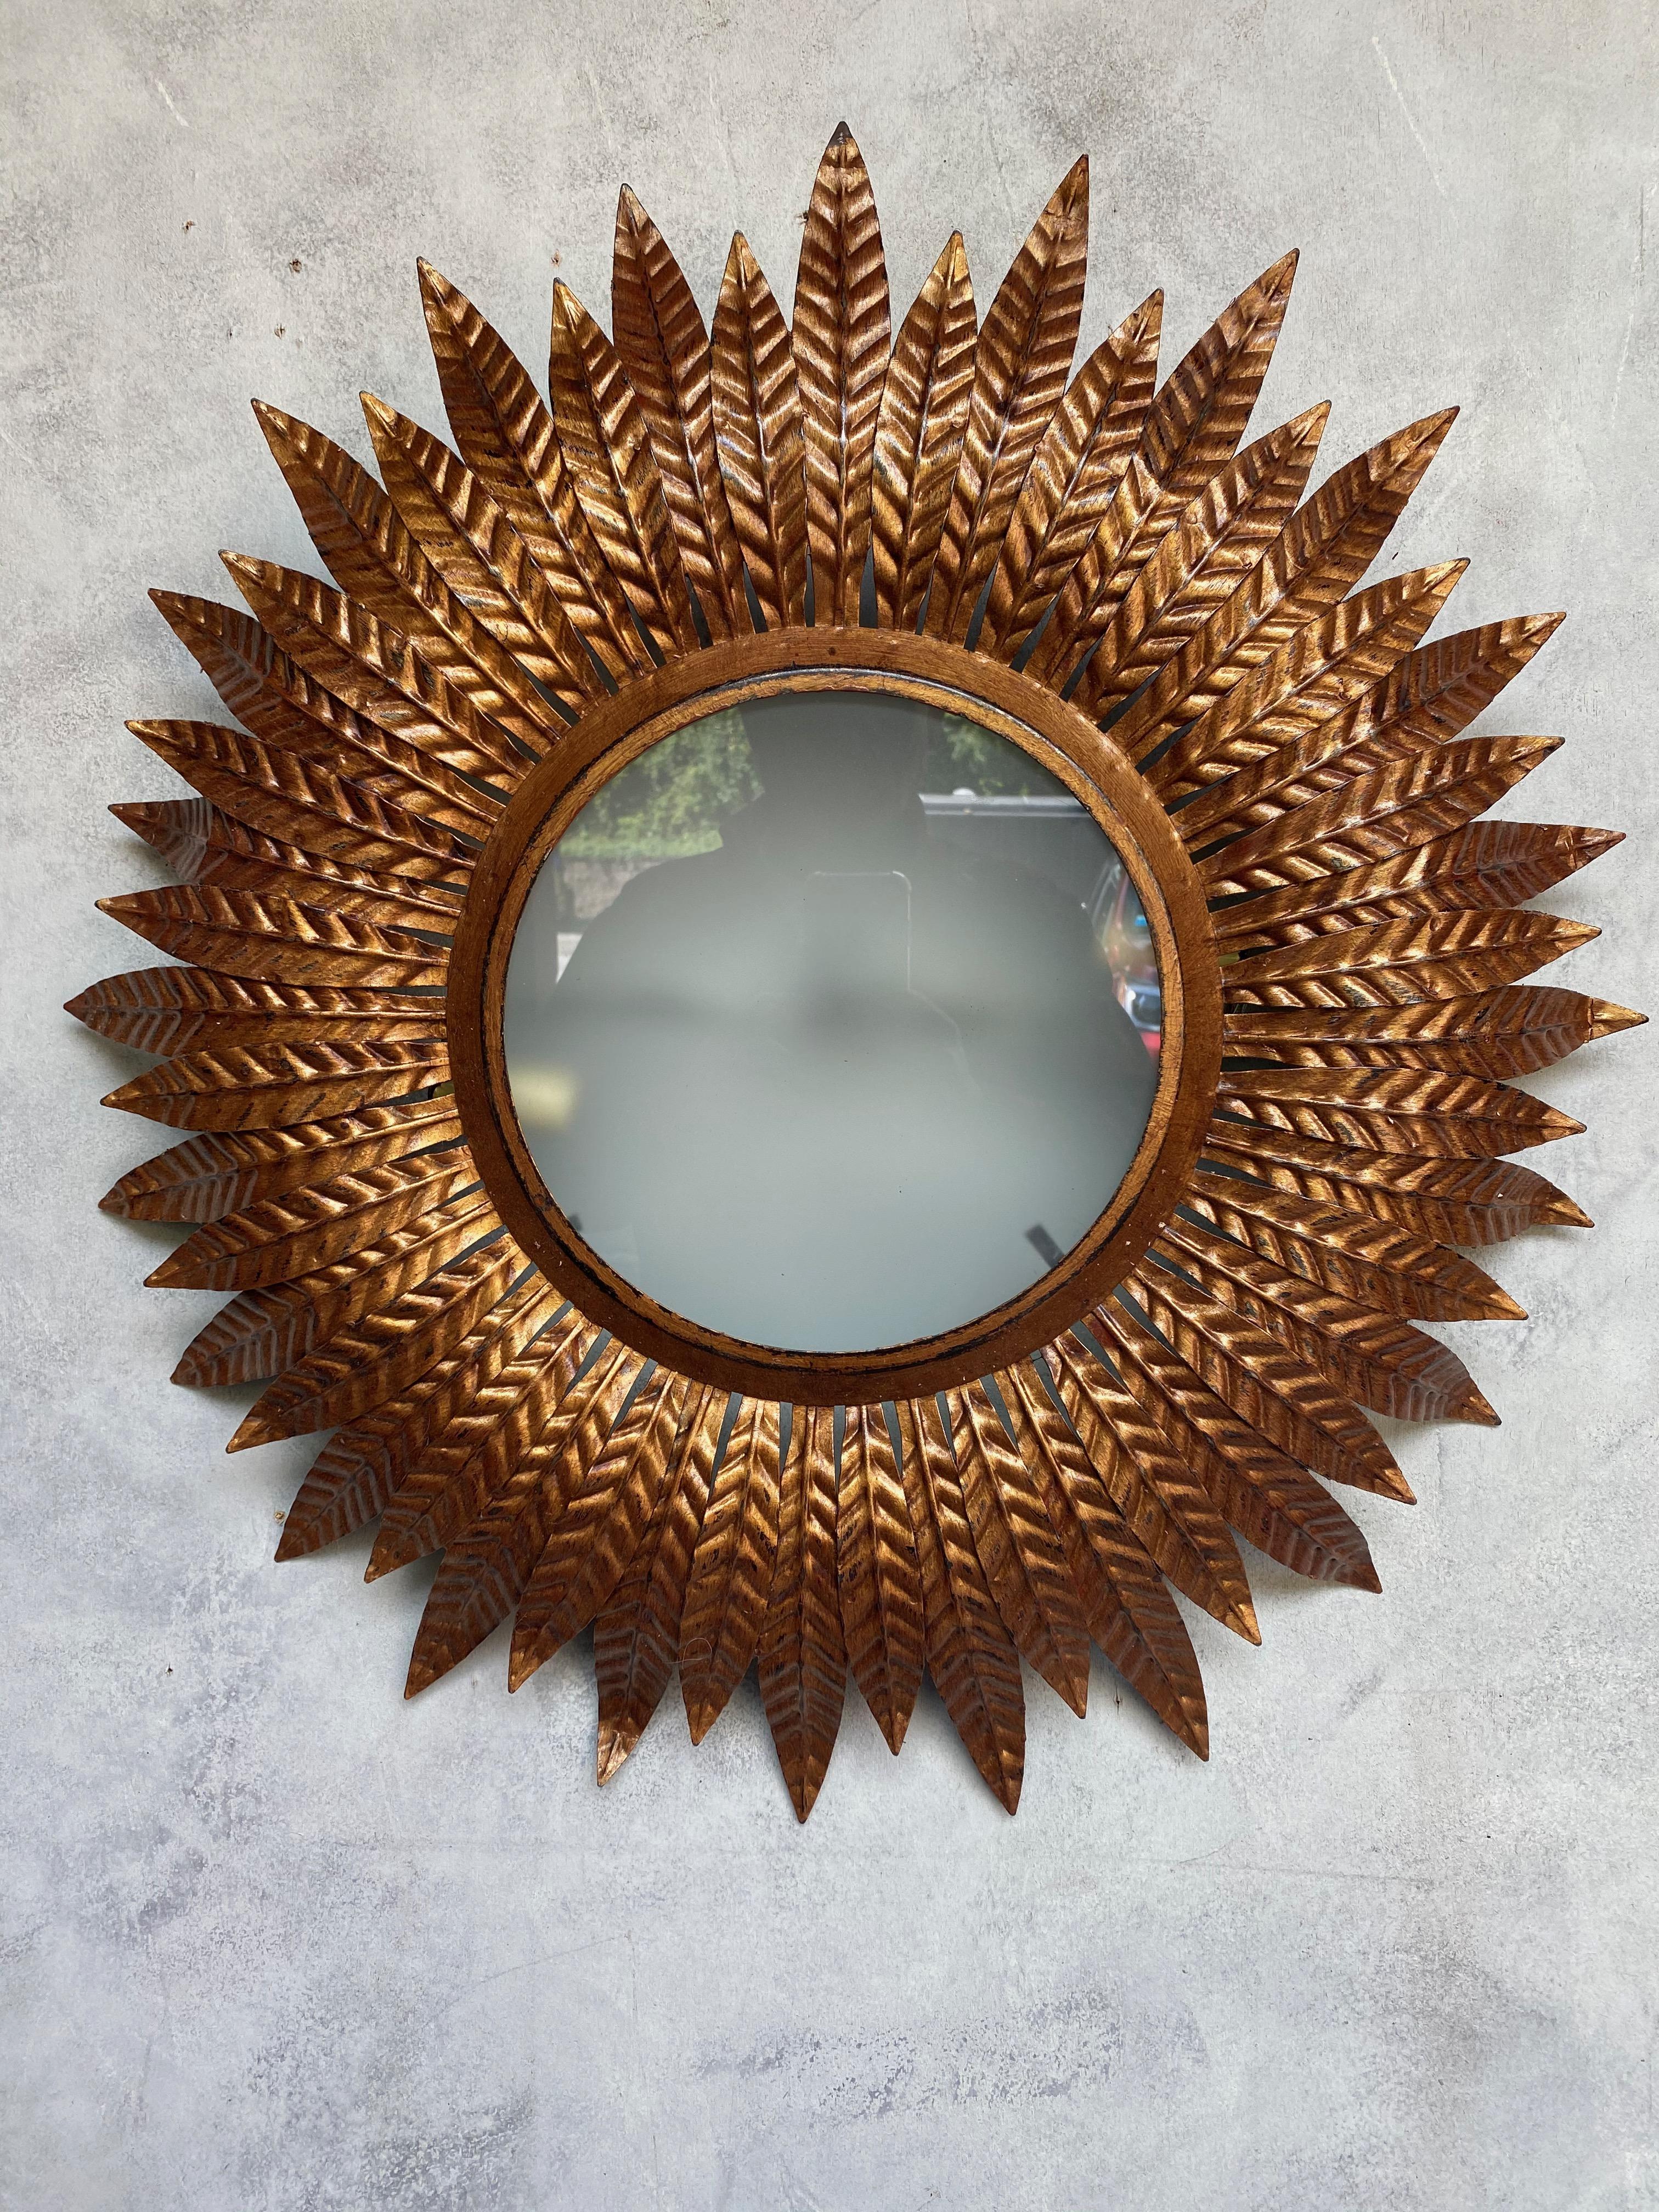 This is an interesting Spanish flushmount ceiling fixture from the 1950s. The gilt metal has a rich, deep antique gold patina. The sandblasted glass diffuser is surrounded by a double layer of closely arranged leaves, alternating between a longer